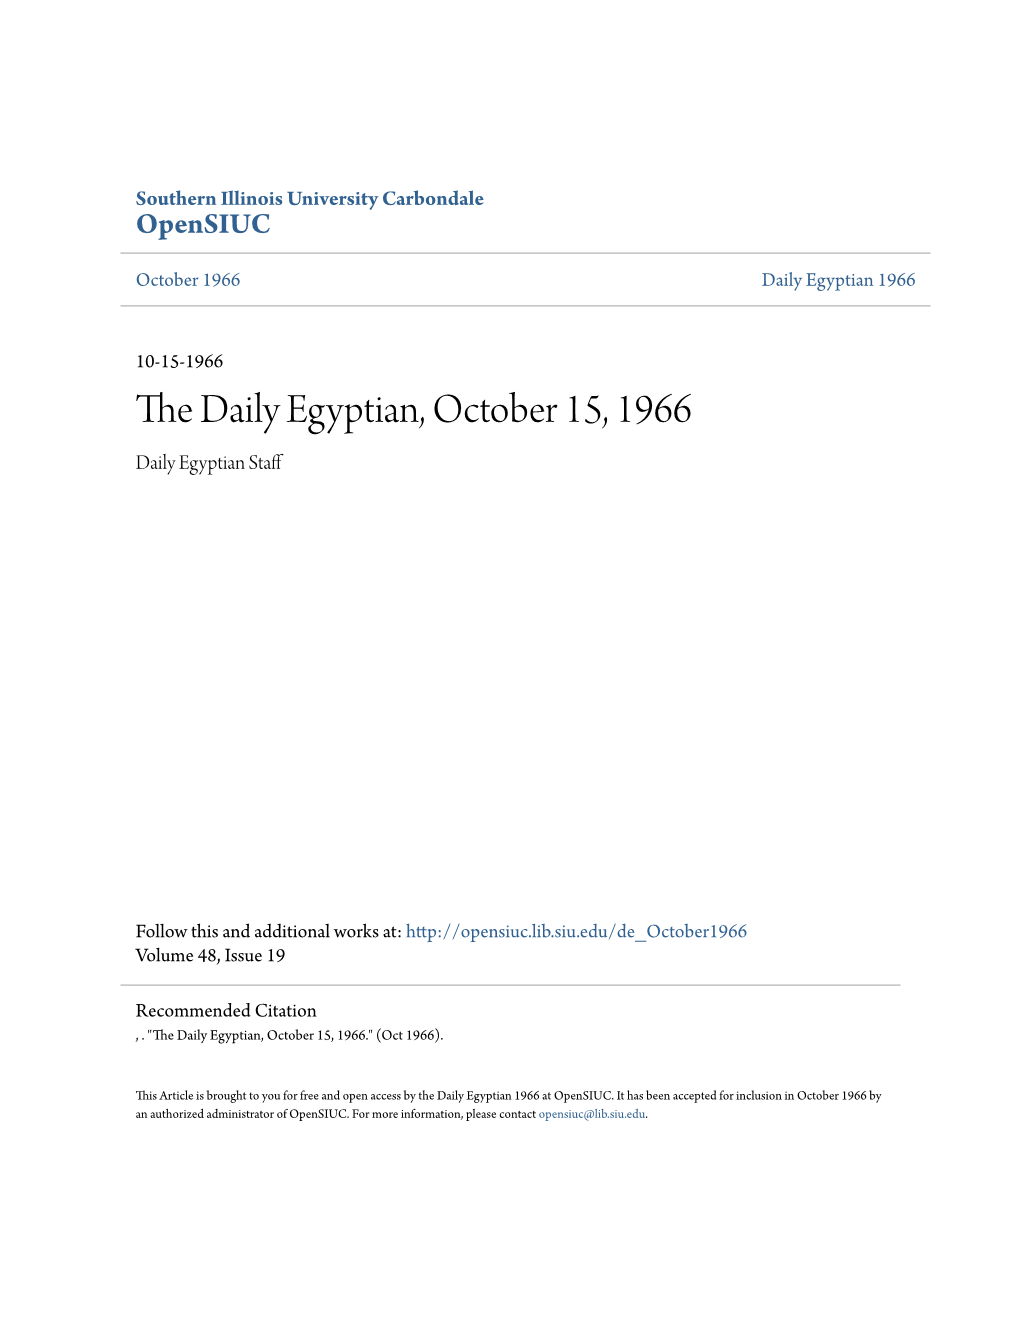 The Daily Egyptian, October 15, 1966